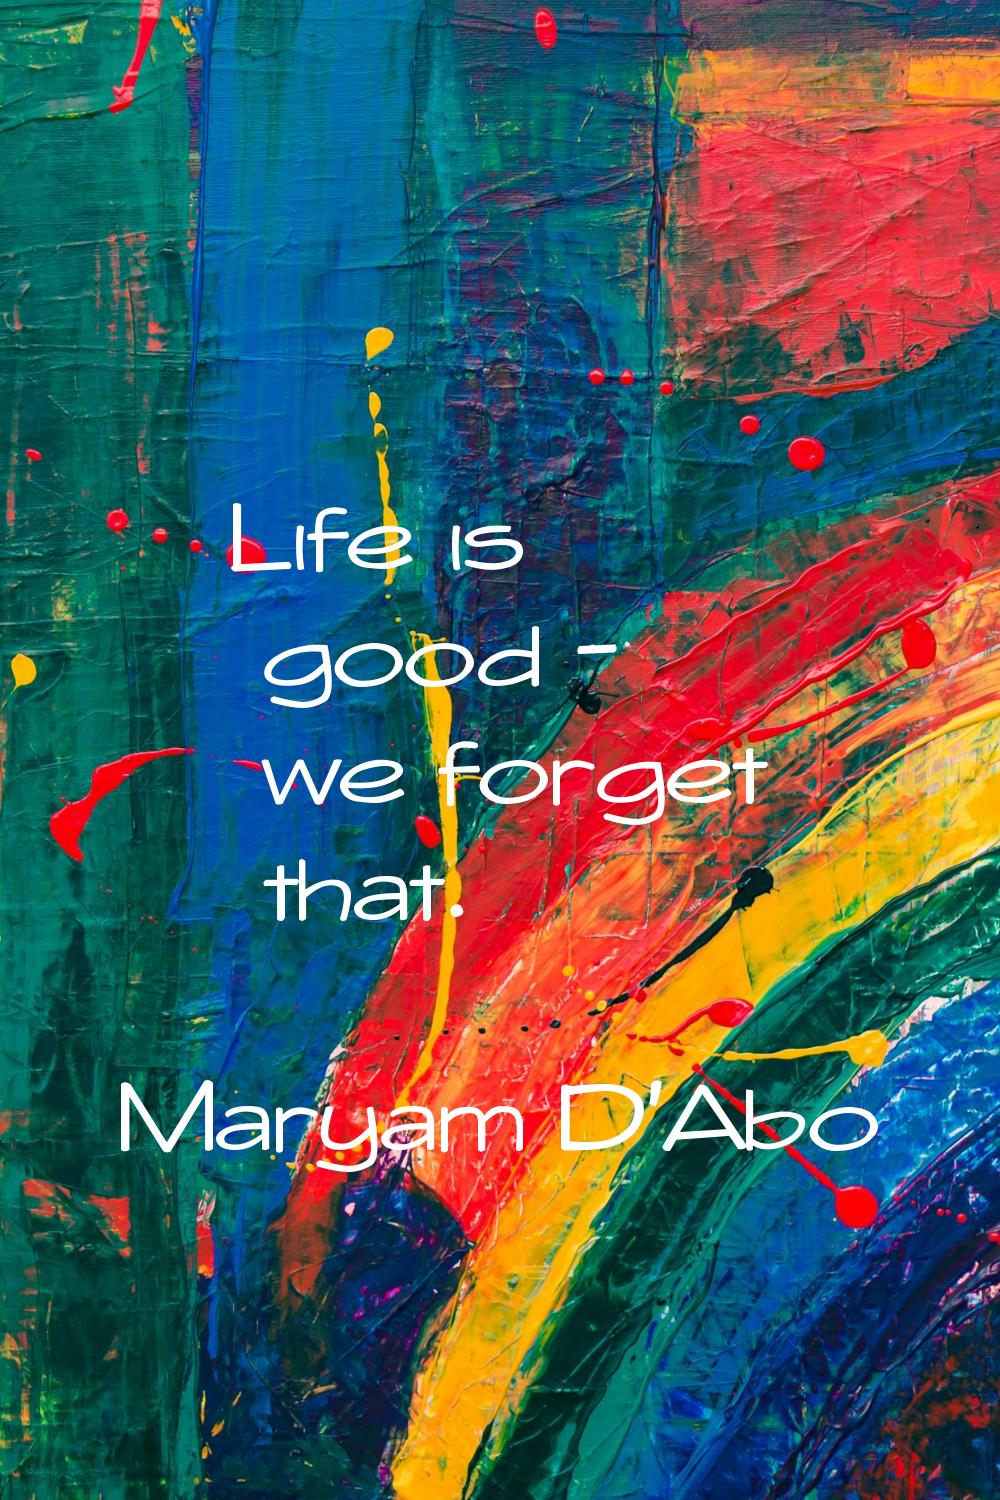 Life is good - we forget that.